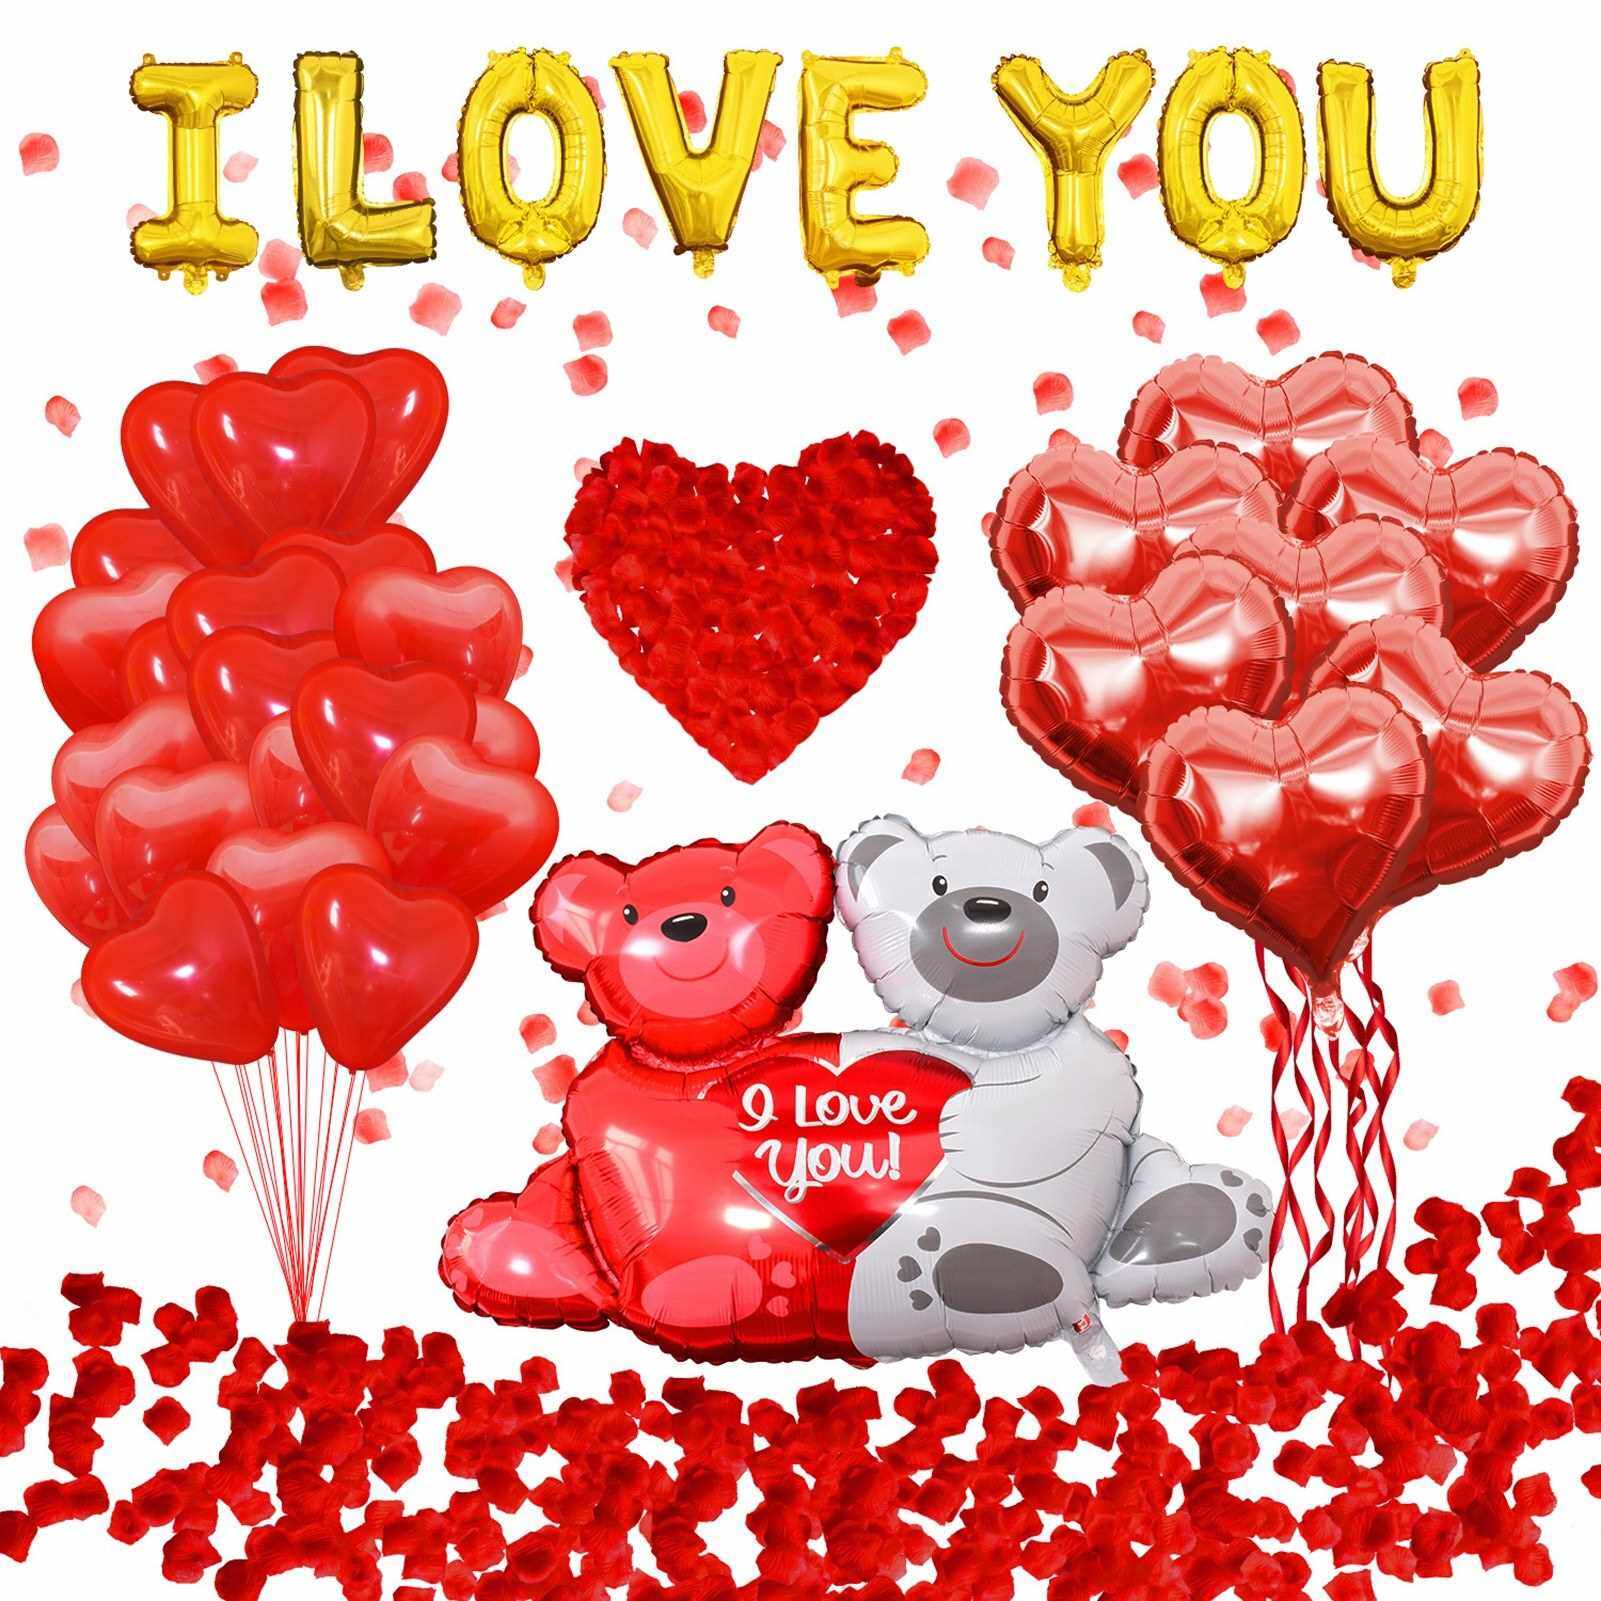 People's Choice Valentines Day Latex Balloons ''I Love You'' Balloons and Heart Balloons Kit with 1000 Pcs Red Silk Rose Petals, Wedding Flower Decoration Bear Foil Balloons for Valentine Day Party Decorations (Standard)